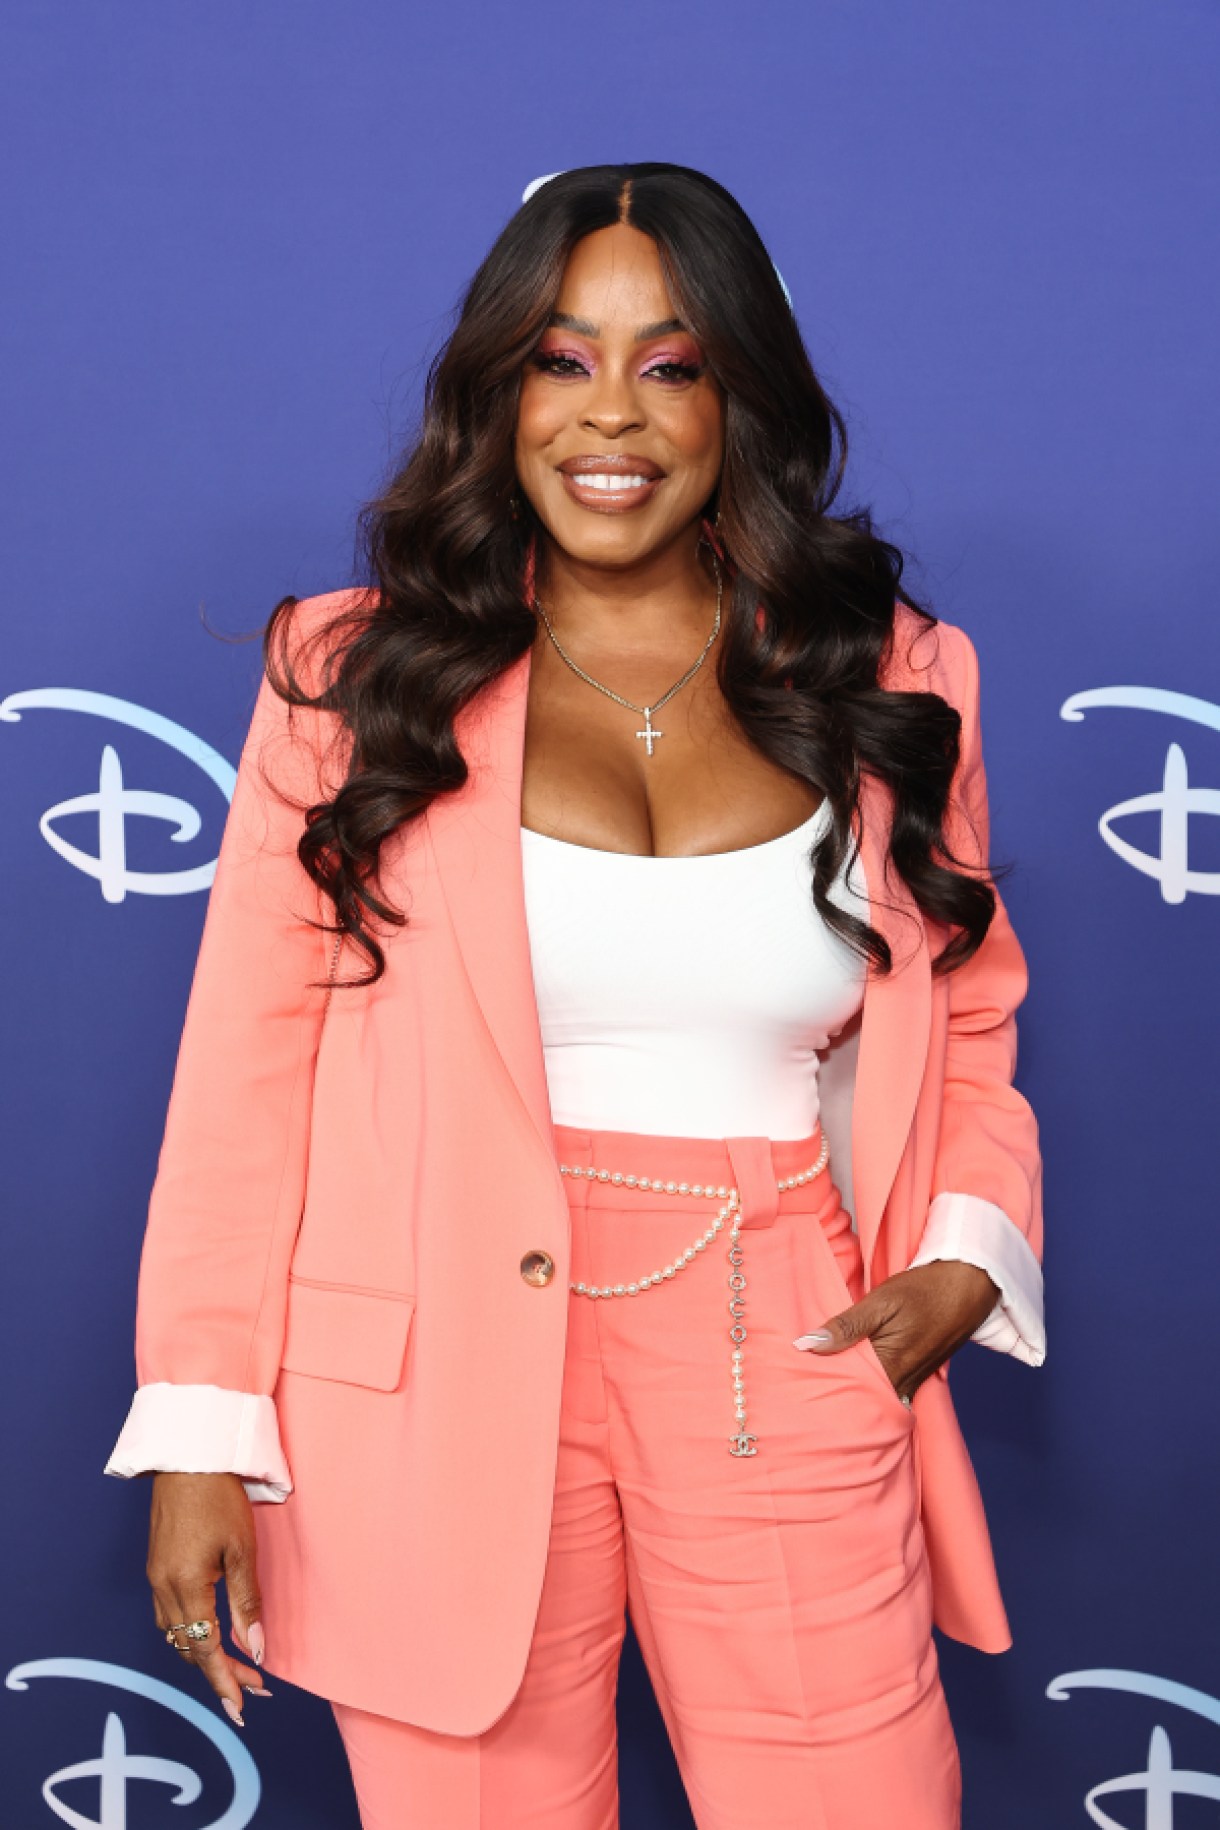 NEW YORK, NEW YORK - MAY 17: Niecy Nash attends the 2022 ABC Disney Upfront at Basketball City - Pier 36 - South Street on May 17, 2022 in New York City. (Photo by Arturo Holmes/WireImage)